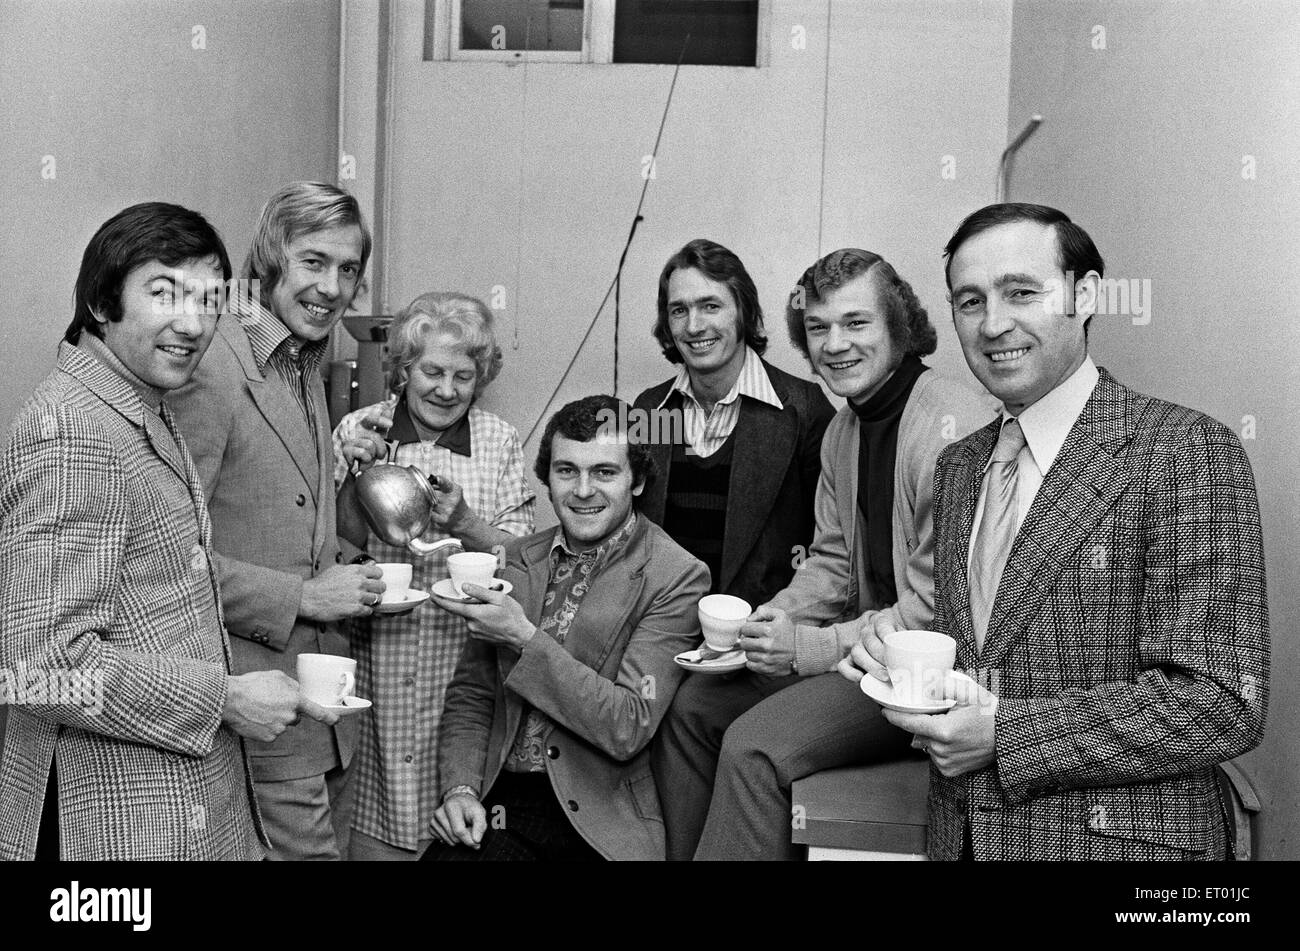 The London contingent of Leicester City football club have a cup of tea and chat about their upcoming match with Arsenal. Pictured are: Jon Sammels, Alan Birchenhall, tea lady Mrs Clarice Laxton, Keith Weller, Len Glover, Dennis Rofe and manager Jimmy Bloomfield. 1st December 1971. Stock Photo